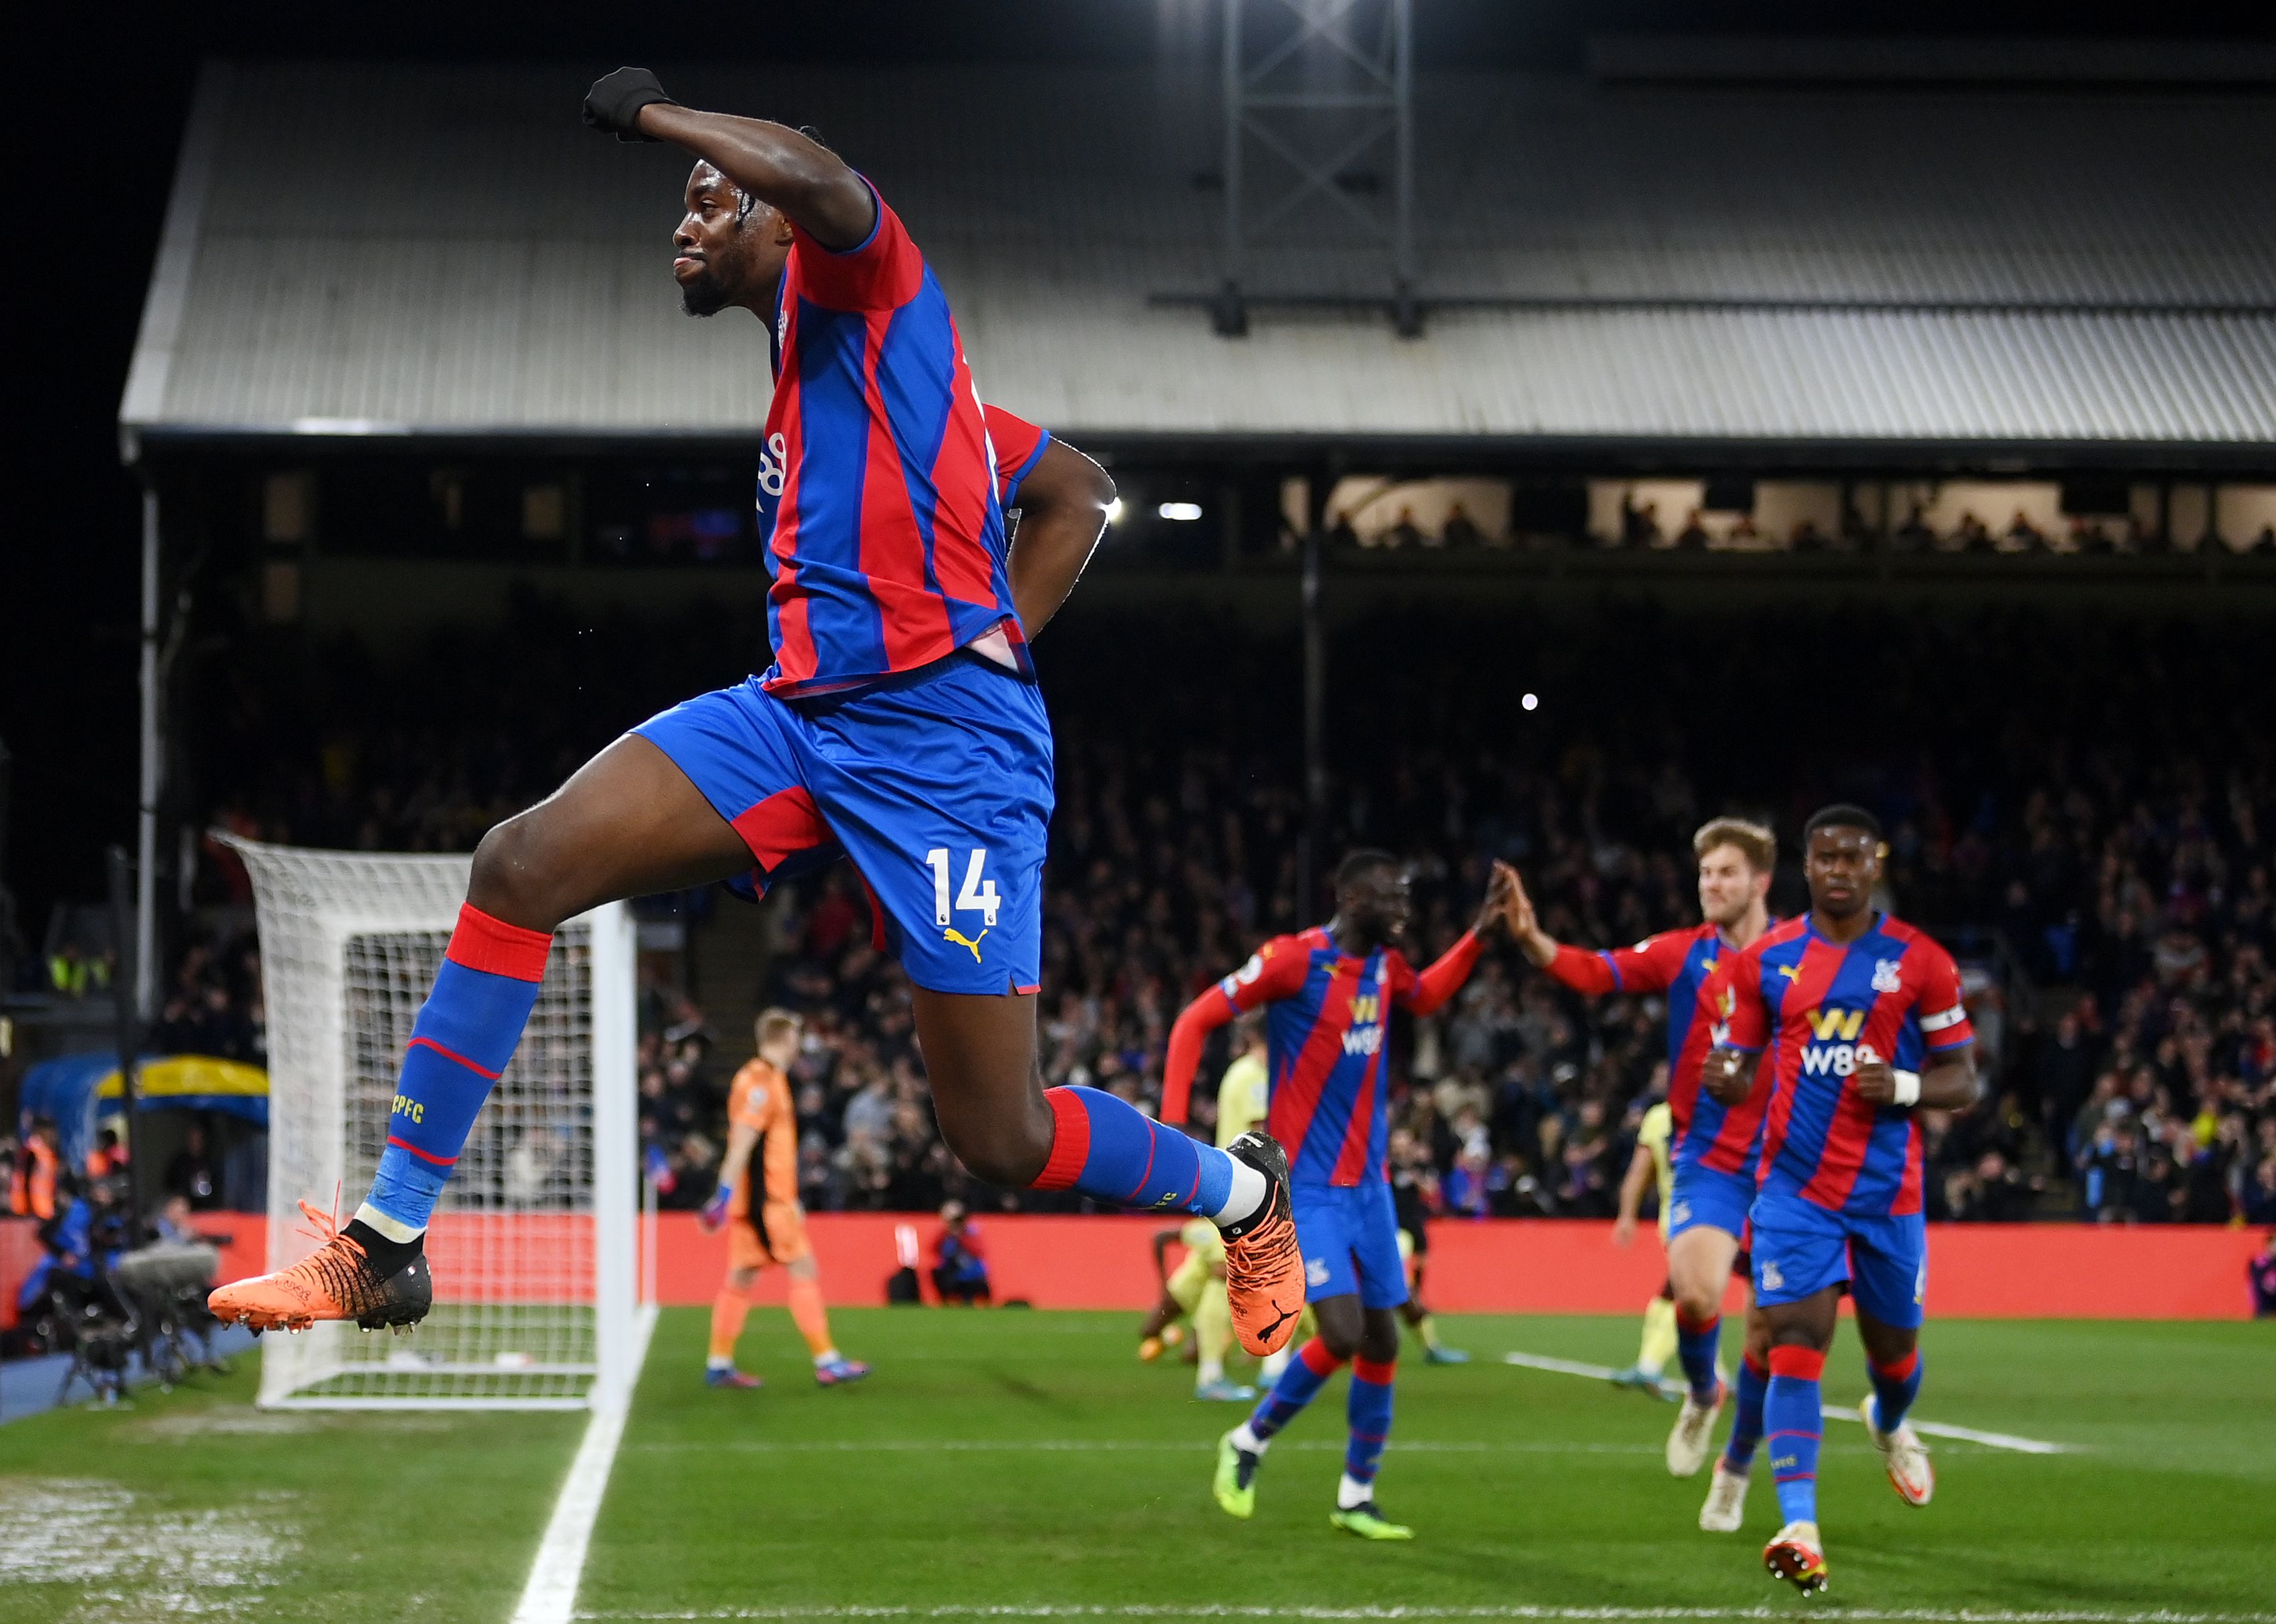 Jean-Philippe Mateta of Crystal Palace celebrates after scoring their side's first goal during the Premier League match between Crystal Palace and Arsenal at Selhurst Park on April 04, 2022 in London, England.